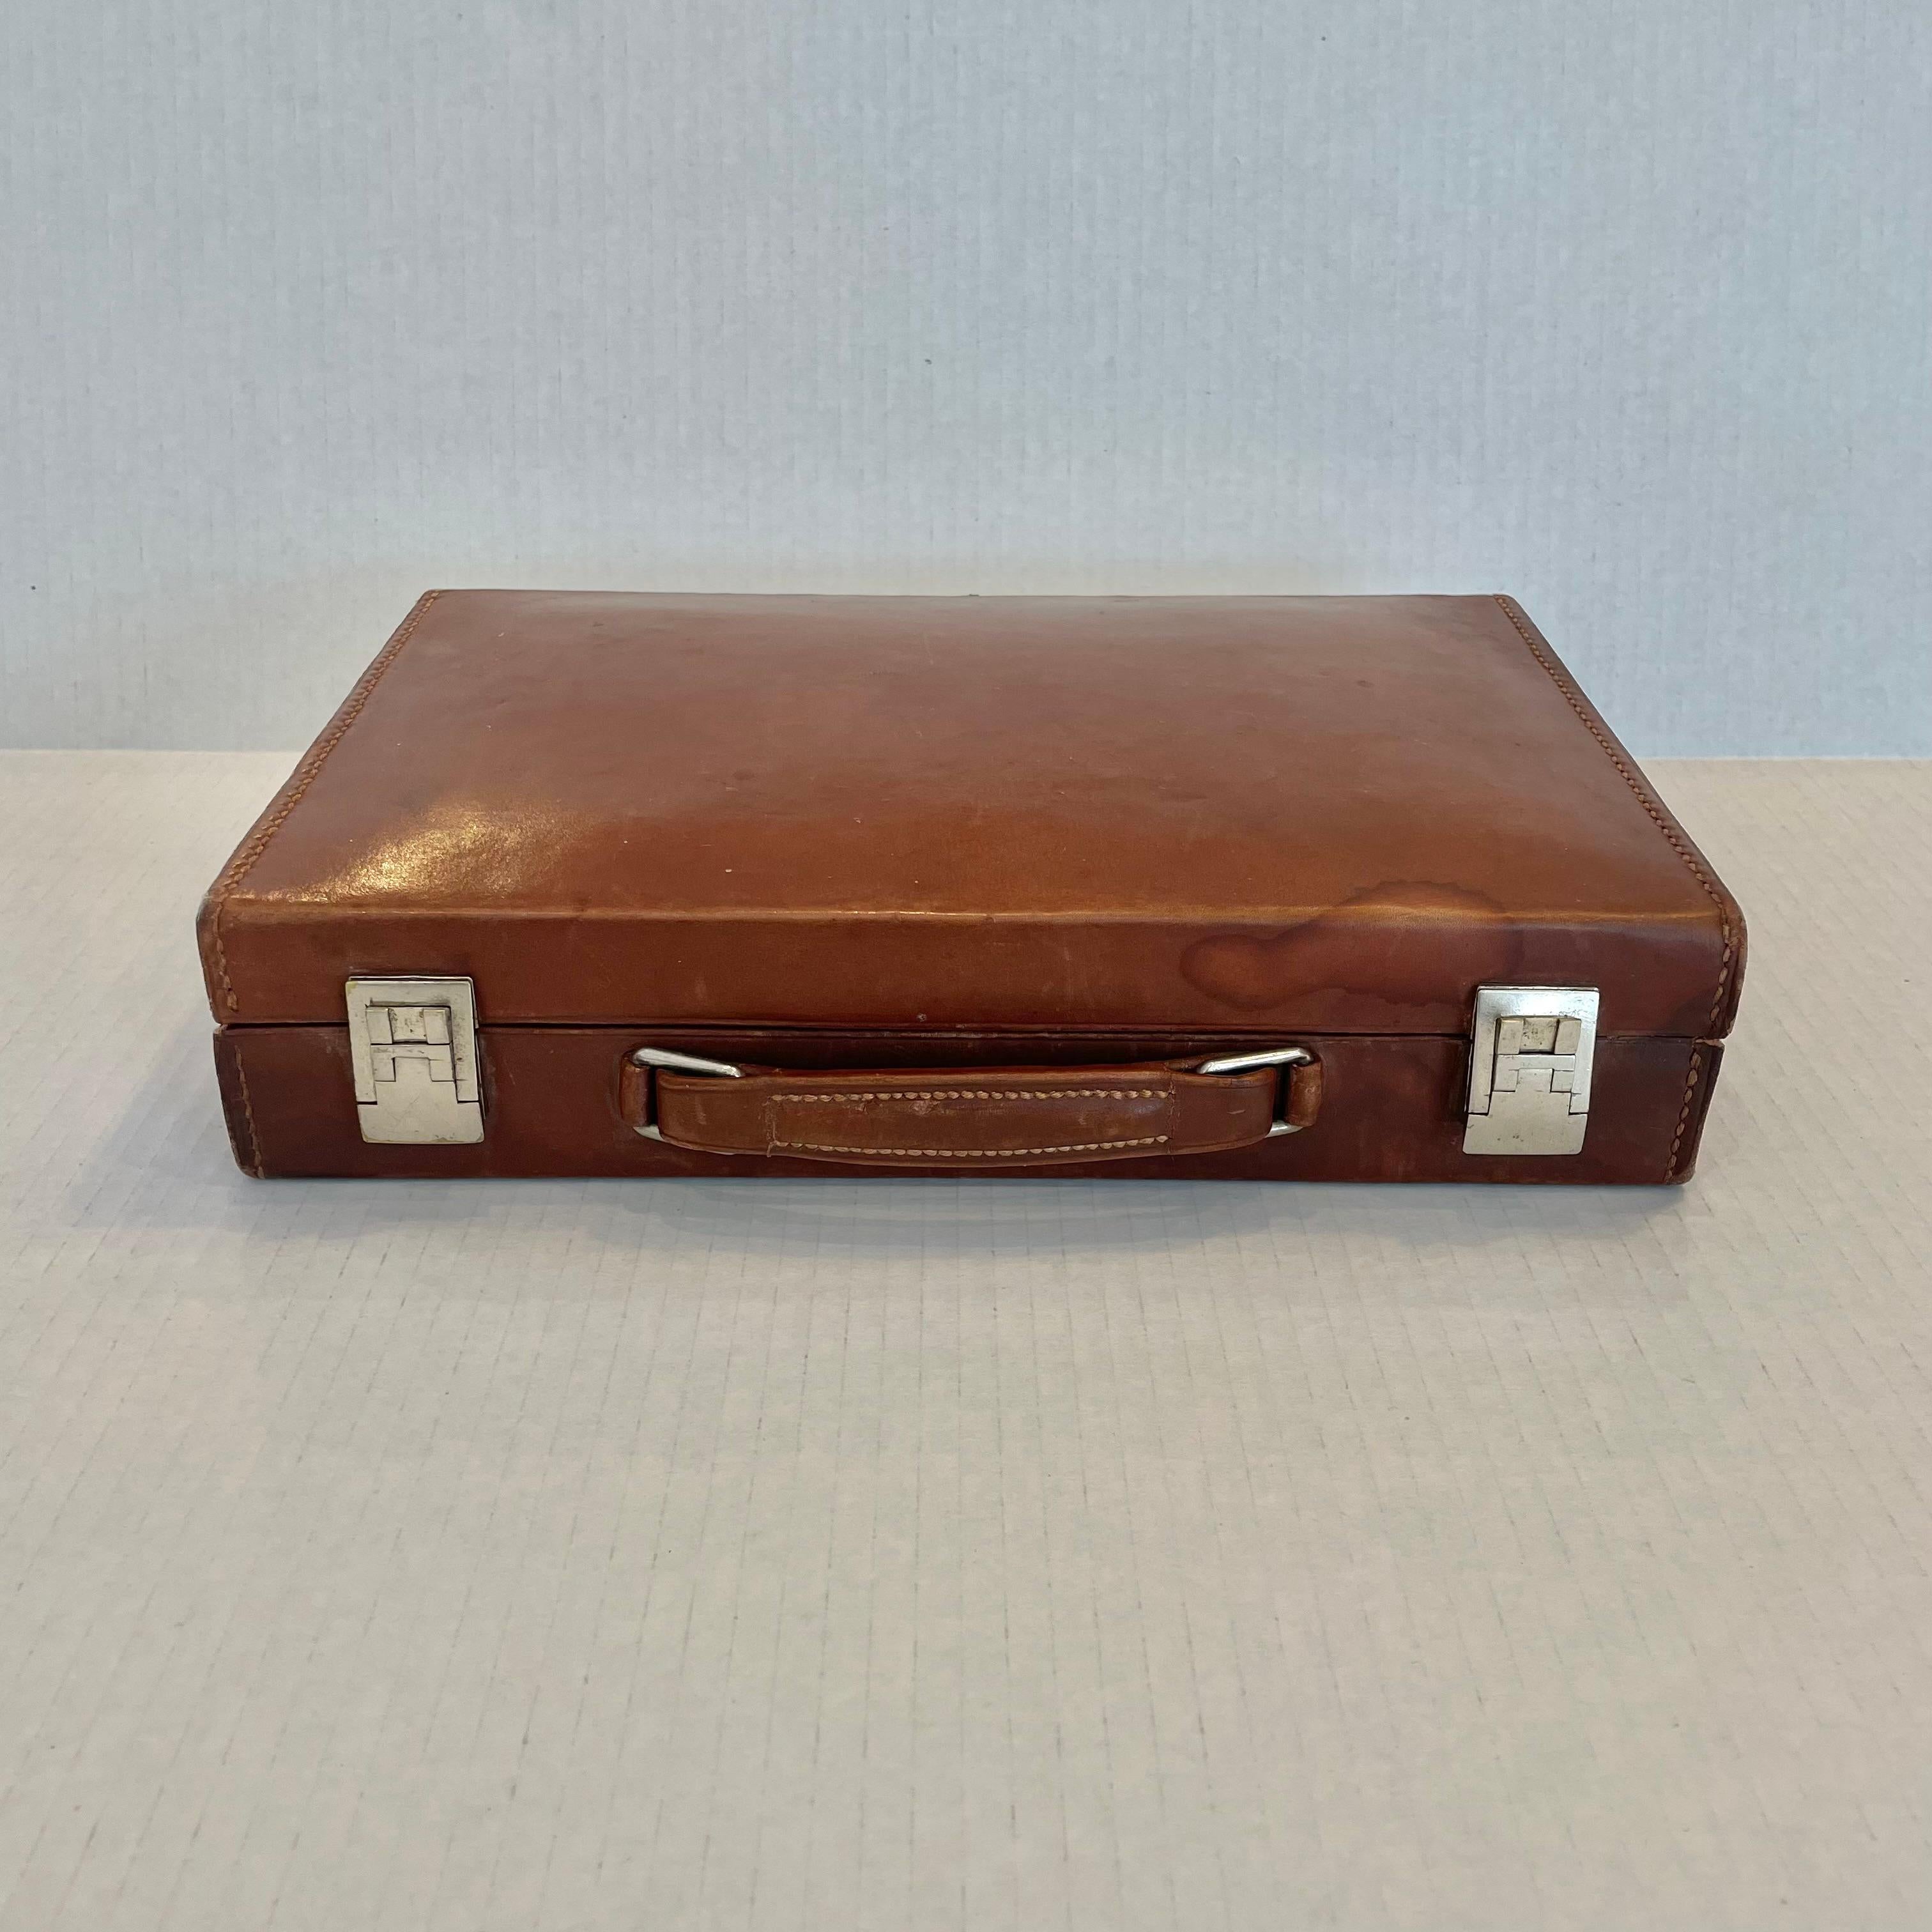 Handsome saddle leather case by French fashion house, Hermes. Made in the 1950s. H metal buckles flank each side of the case. Case opens up to reveal 'HERMES - MADE IN PARIS' on leather. Inside there is a large grouping of shaving/toiletry items.